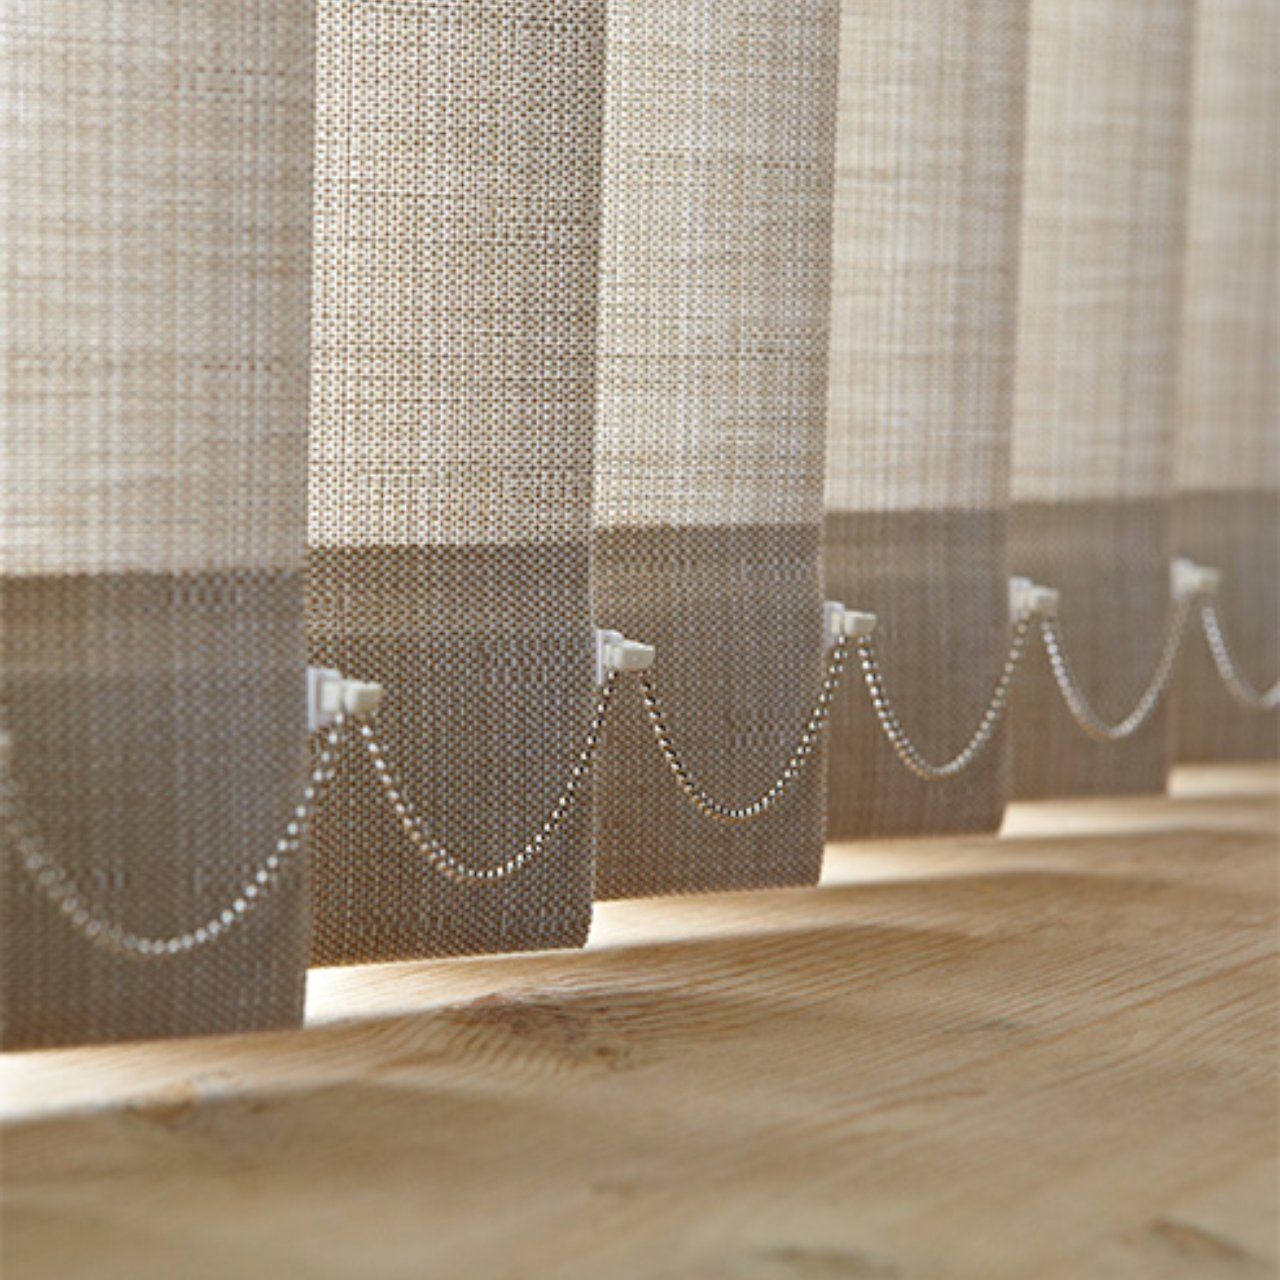 Blind Curtains: Add Privacy and Style to Your Windows with Blind Curtains